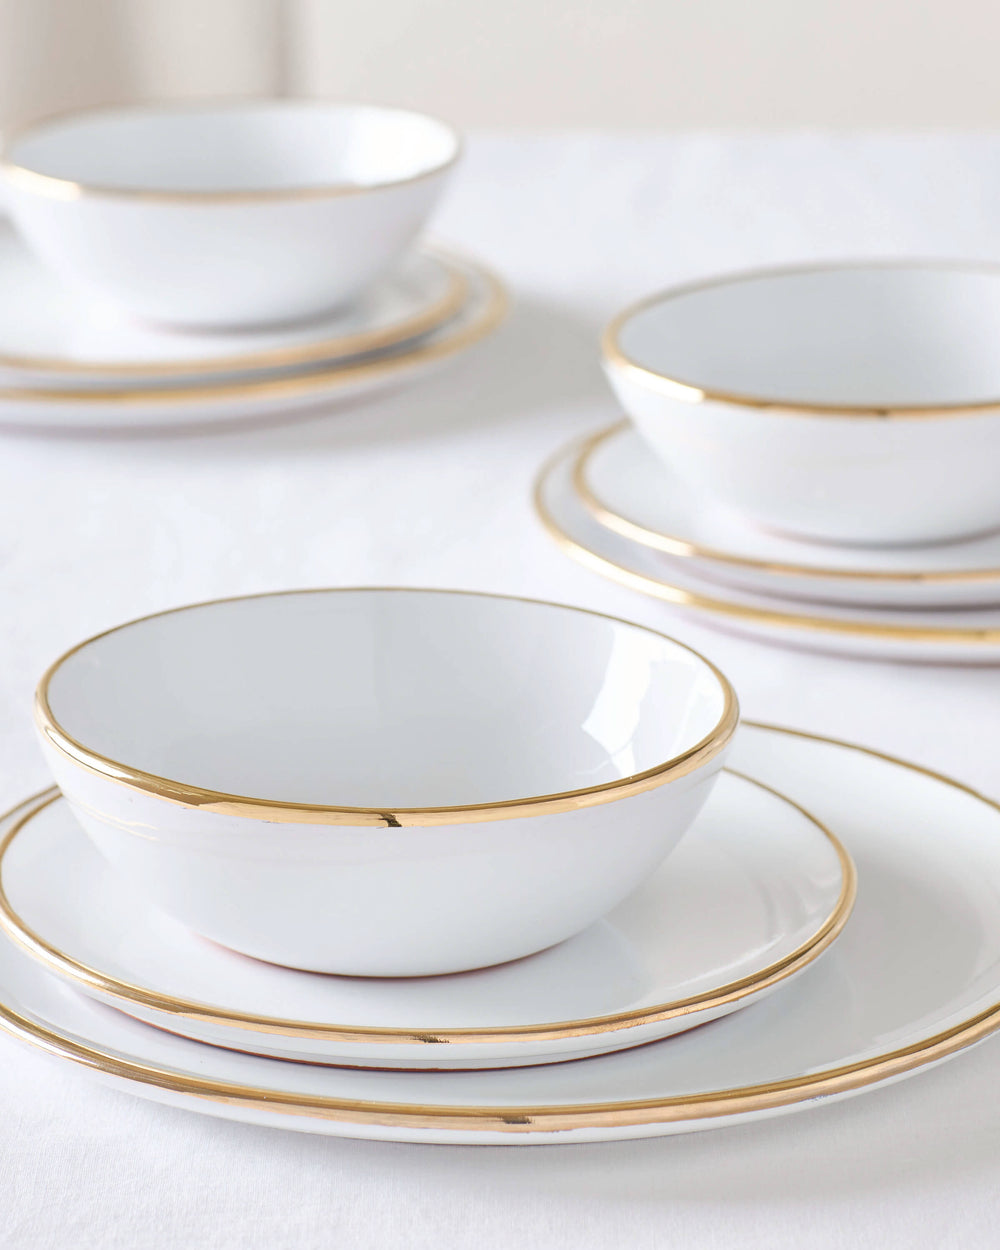 Fez Gold Rimmed Dinnerware sets by Fairkind. White ceramic tableware with 18k gold edge.